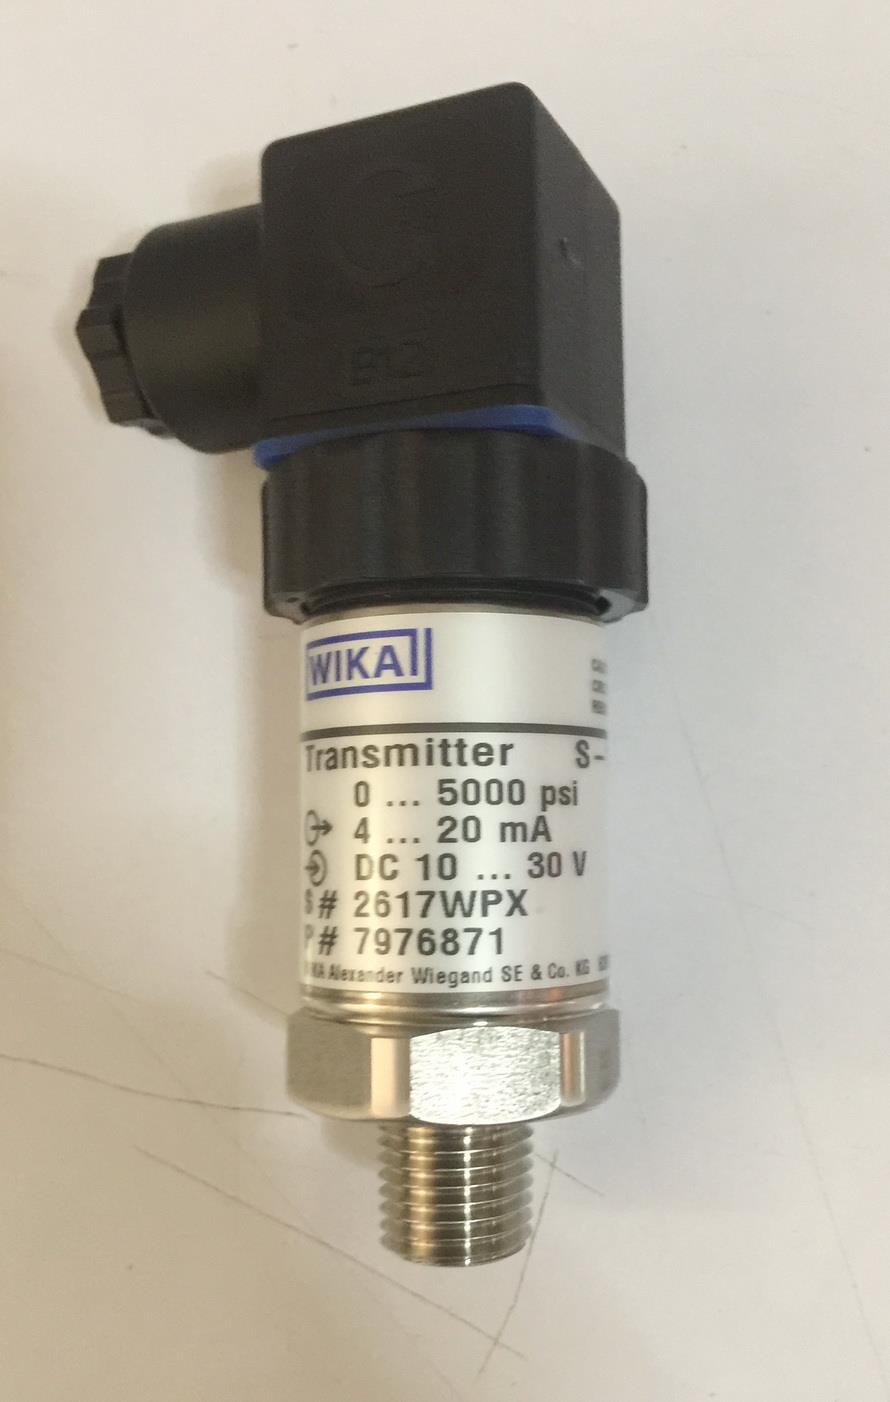 Wika S-10 Pressure Transmitter,Pressure Transmitter, Pressure Sensor, Pressure Transducer, Wika , S - 10,Wika,Automation and Electronics/Electronic Components/Transmitters